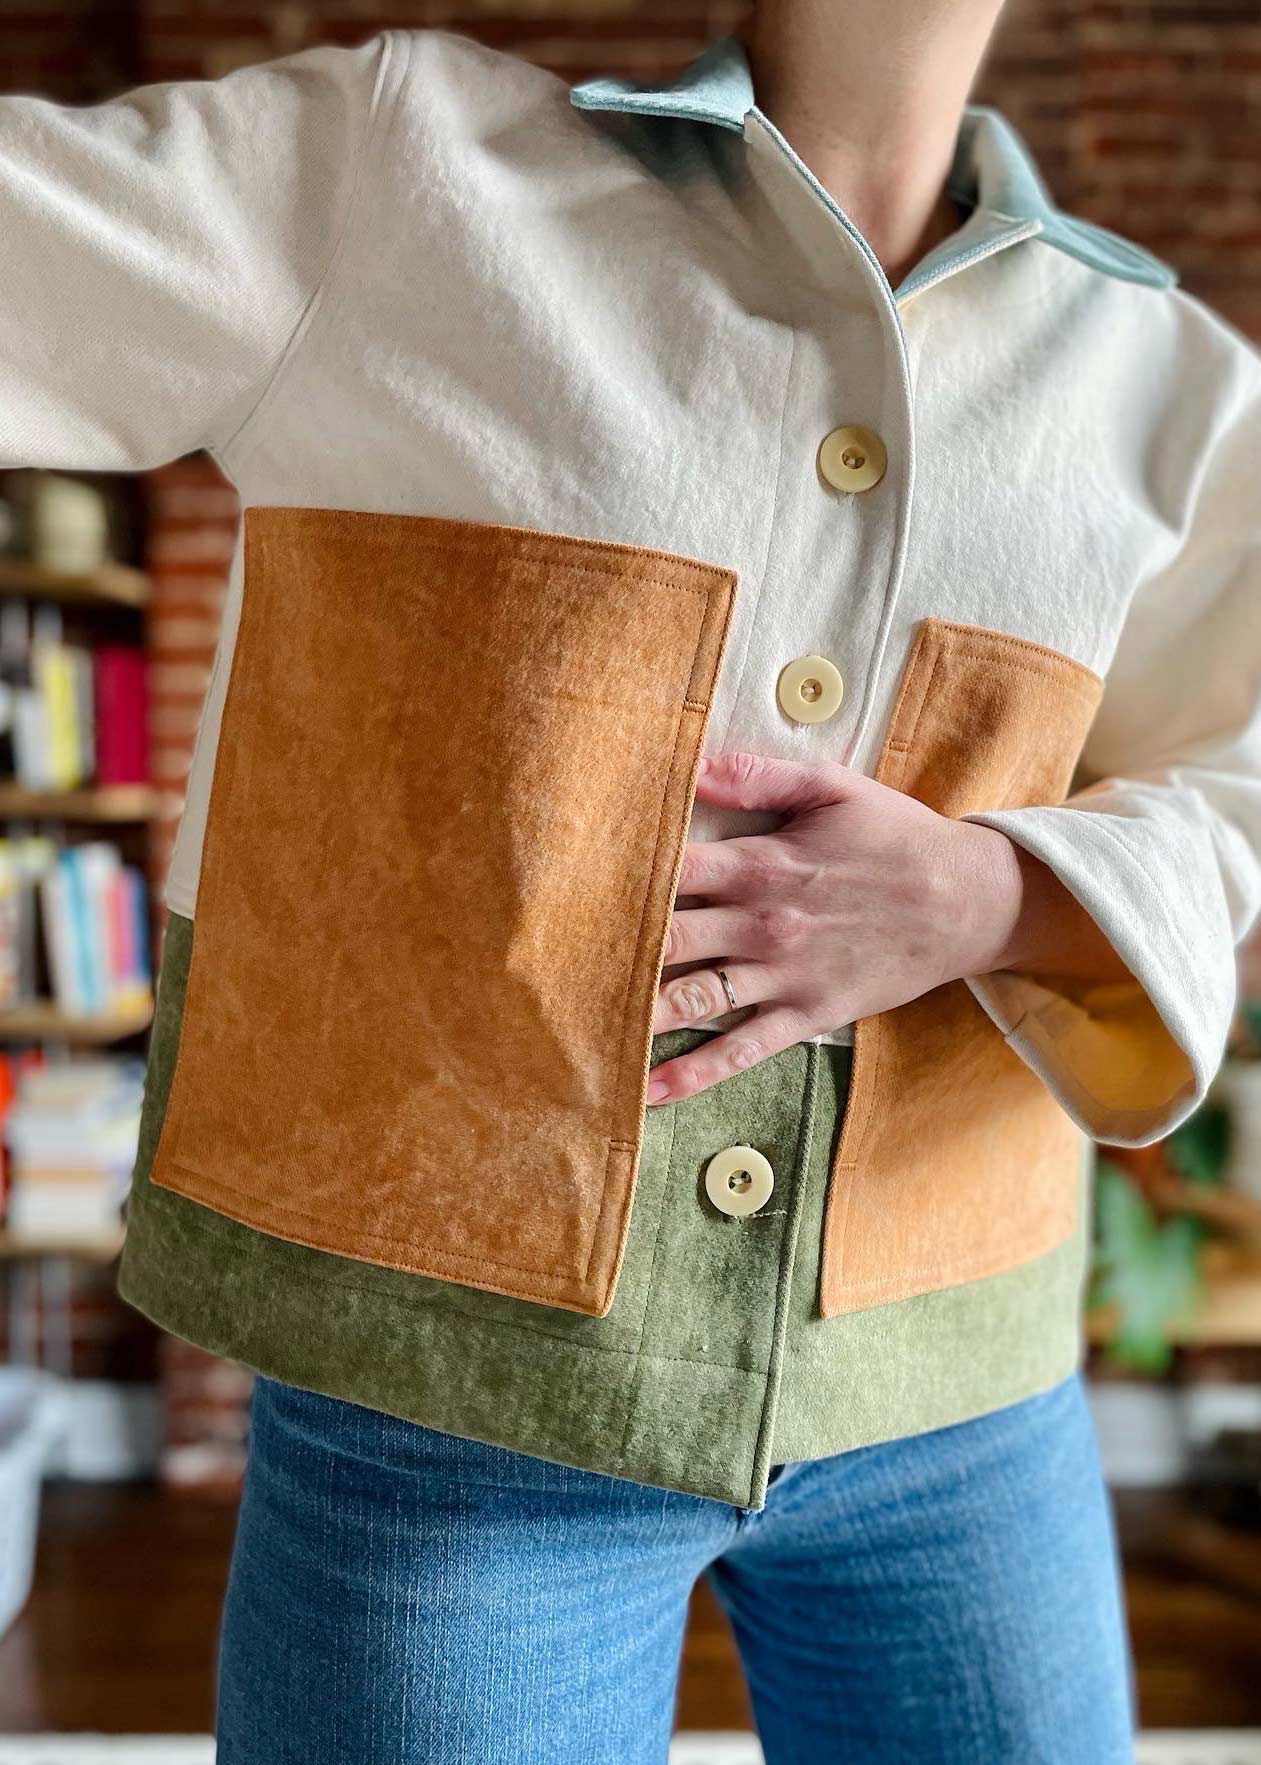 Made-to-order Color Block Jacket: Cream color body for Sara